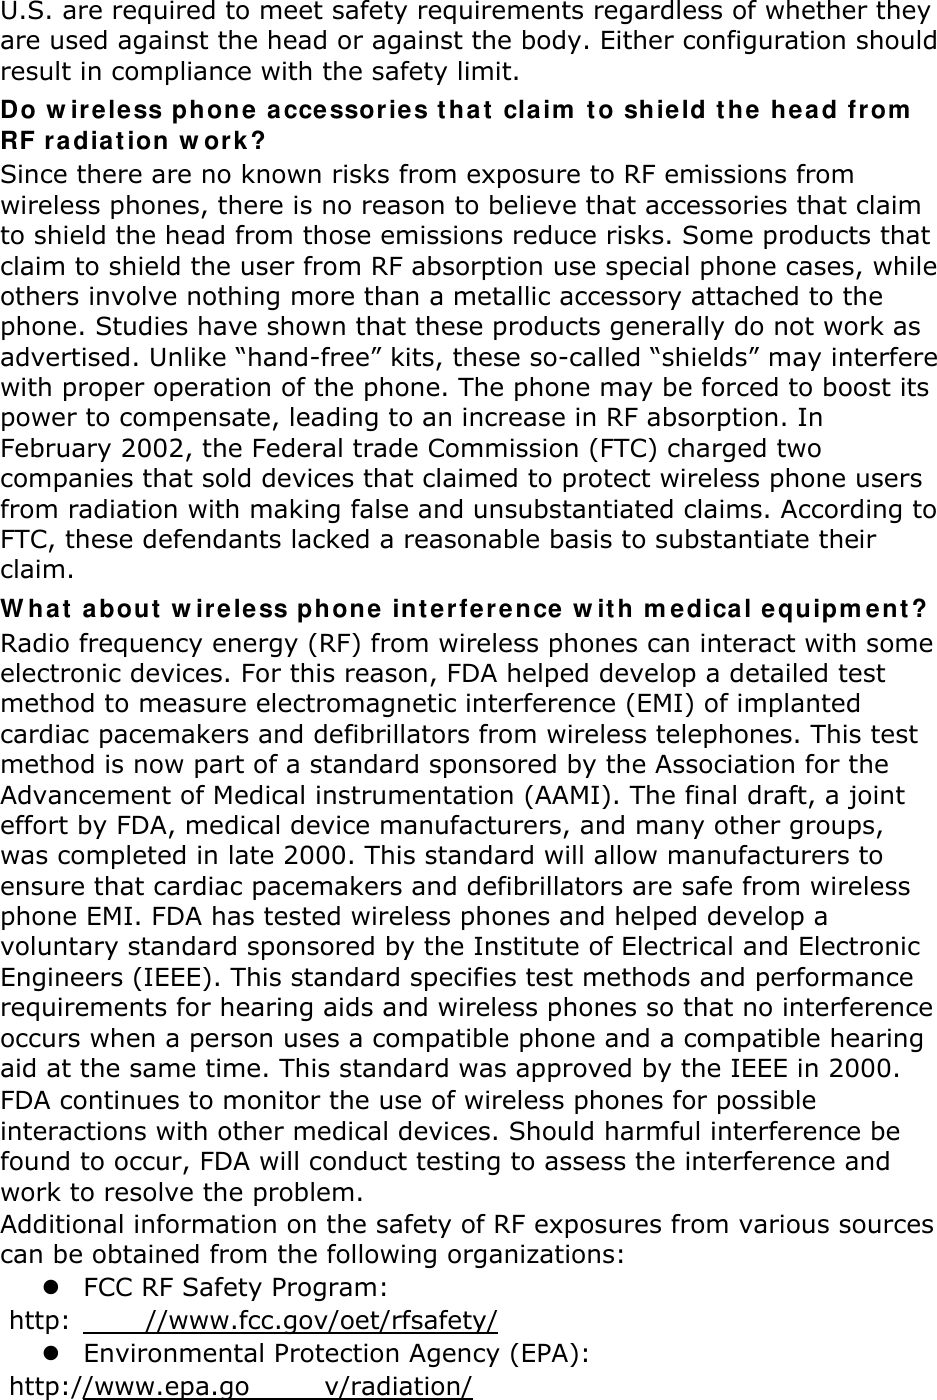 U.S. are required to meet safety requirements regardless of whether they are used against the head or against the body. Either configuration should result in compliance with the safety limit. Do wireless phone accessories that claim to shield the head from RF radiation work? Since there are no known risks from exposure to RF emissions from wireless phones, there is no reason to believe that accessories that claim to shield the head from those emissions reduce risks. Some products that claim to shield the user from RF absorption use special phone cases, while others involve nothing more than a metallic accessory attached to the phone. Studies have shown that these products generally do not work as advertised. Unlike “hand-free” kits, these so-called “shields” may interfere with proper operation of the phone. The phone may be forced to boost its power to compensate, leading to an increase in RF absorption. In February 2002, the Federal trade Commission (FTC) charged two companies that sold devices that claimed to protect wireless phone users from radiation with making false and unsubstantiated claims. According to FTC, these defendants lacked a reasonable basis to substantiate their claim. What about wireless phone interference with medical equipment? Radio frequency energy (RF) from wireless phones can interact with some electronic devices. For this reason, FDA helped develop a detailed test method to measure electromagnetic interference (EMI) of implanted cardiac pacemakers and defibrillators from wireless telephones. This test method is now part of a standard sponsored by the Association for the Advancement of Medical instrumentation (AAMI). The final draft, a joint effort by FDA, medical device manufacturers, and many other groups, was completed in late 2000. This standard will allow manufacturers to ensure that cardiac pacemakers and defibrillators are safe from wireless phone EMI. FDA has tested wireless phones and helped develop a voluntary standard sponsored by the Institute of Electrical and Electronic Engineers (IEEE). This standard specifies test methods and performance requirements for hearing aids and wireless phones so that no interference occurs when a person uses a compatible phone and a compatible hearing aid at the same time. This standard was approved by the IEEE in 2000. FDA continues to monitor the use of wireless phones for possible interactions with other medical devices. Should harmful interference be found to occur, FDA will conduct testing to assess the interference and work to resolve the problem. Additional information on the safety of RF exposures from various sources can be obtained from the following organizations:  FCC RF Safety Program:  http: //www.fcc.gov/oet/rfsafety/  Environmental Protection Agency (EPA):  http://www.epa.go v/radiation/ 